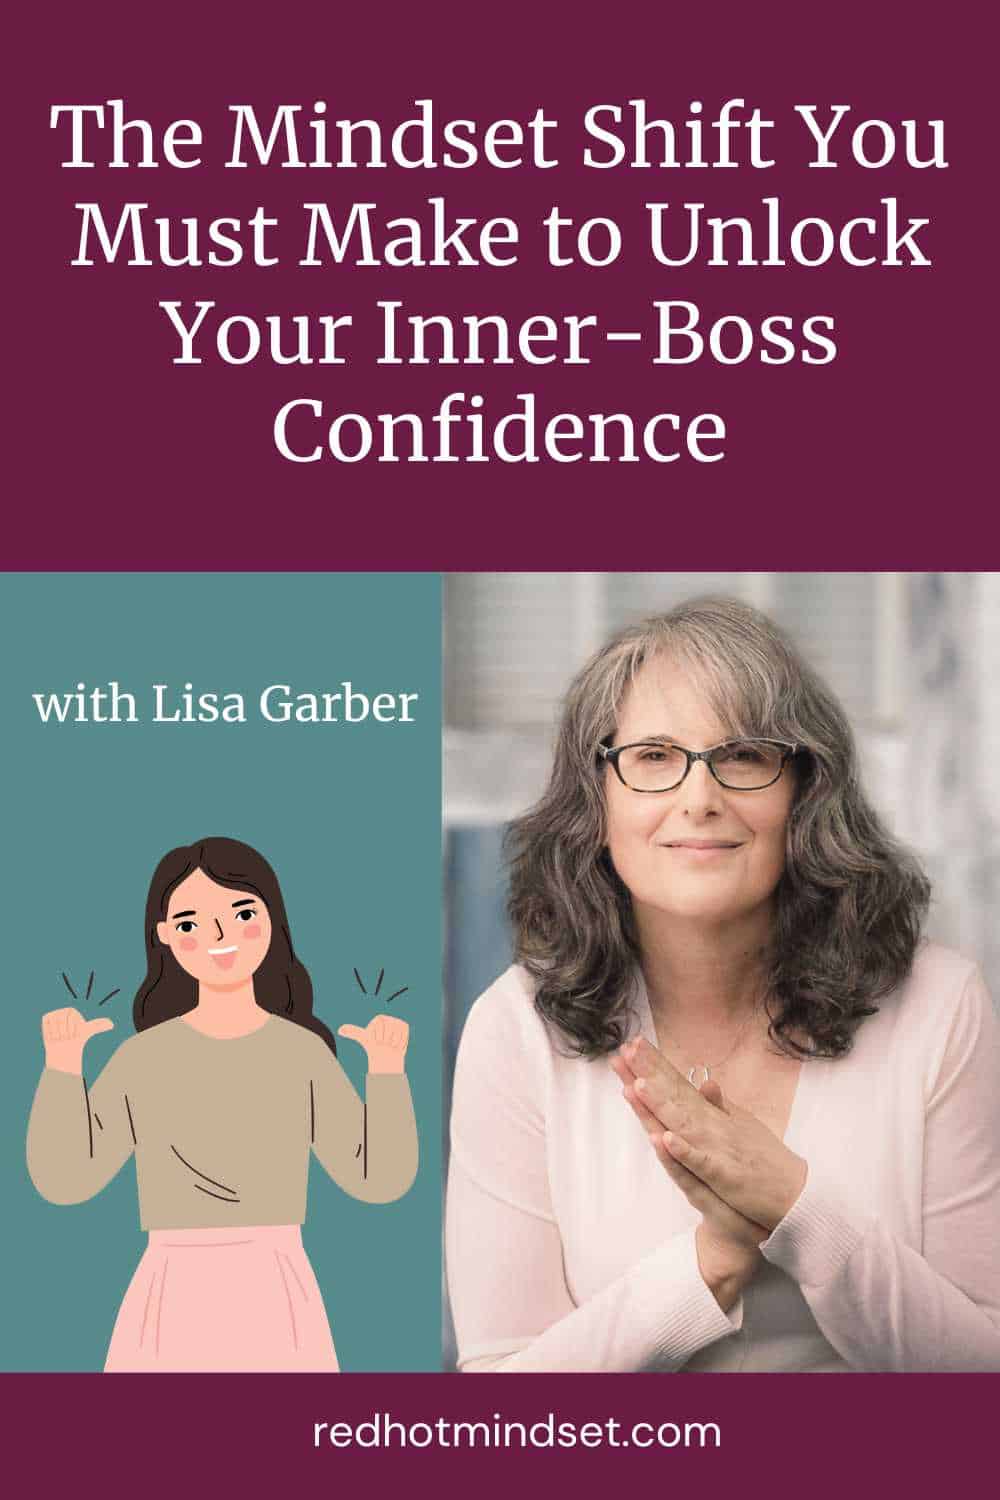 Ep 197 | The Mindset Shift You Must Make to Unlock Your Inner-Boss Confidence with Lisa Garber